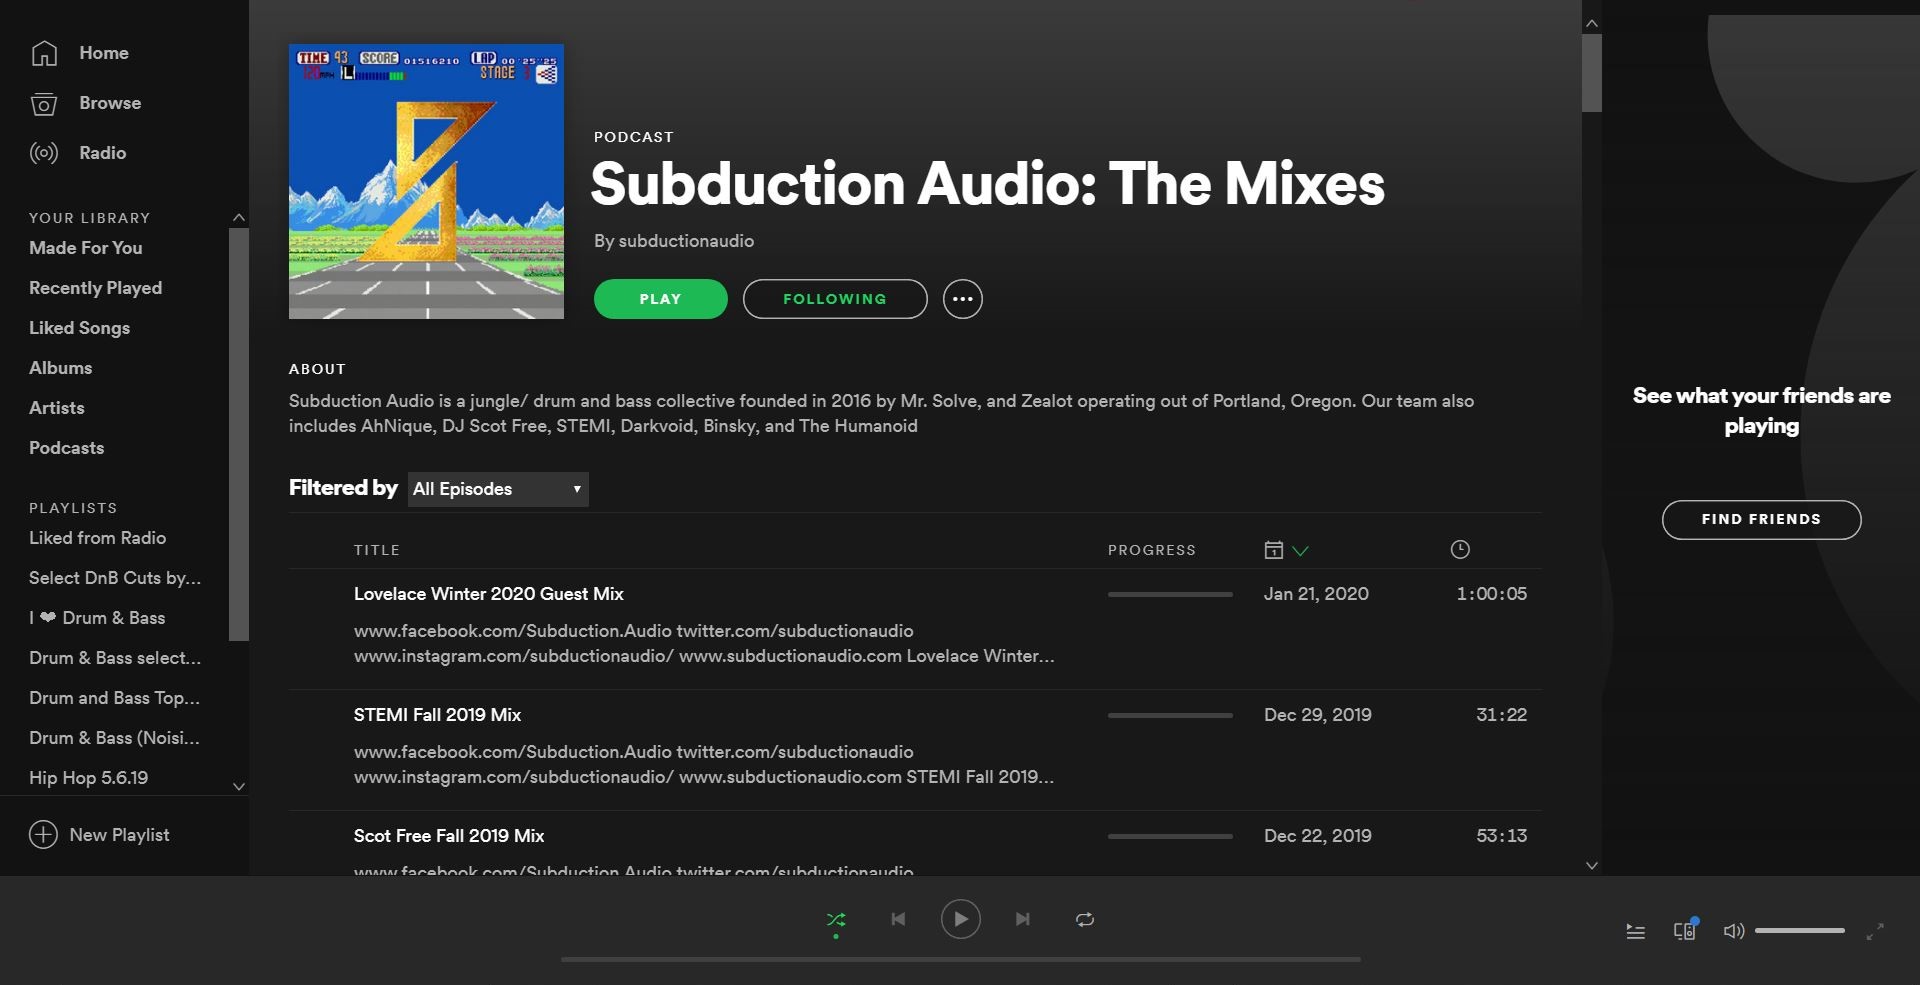 Subduction Audio podcast now on Spotify